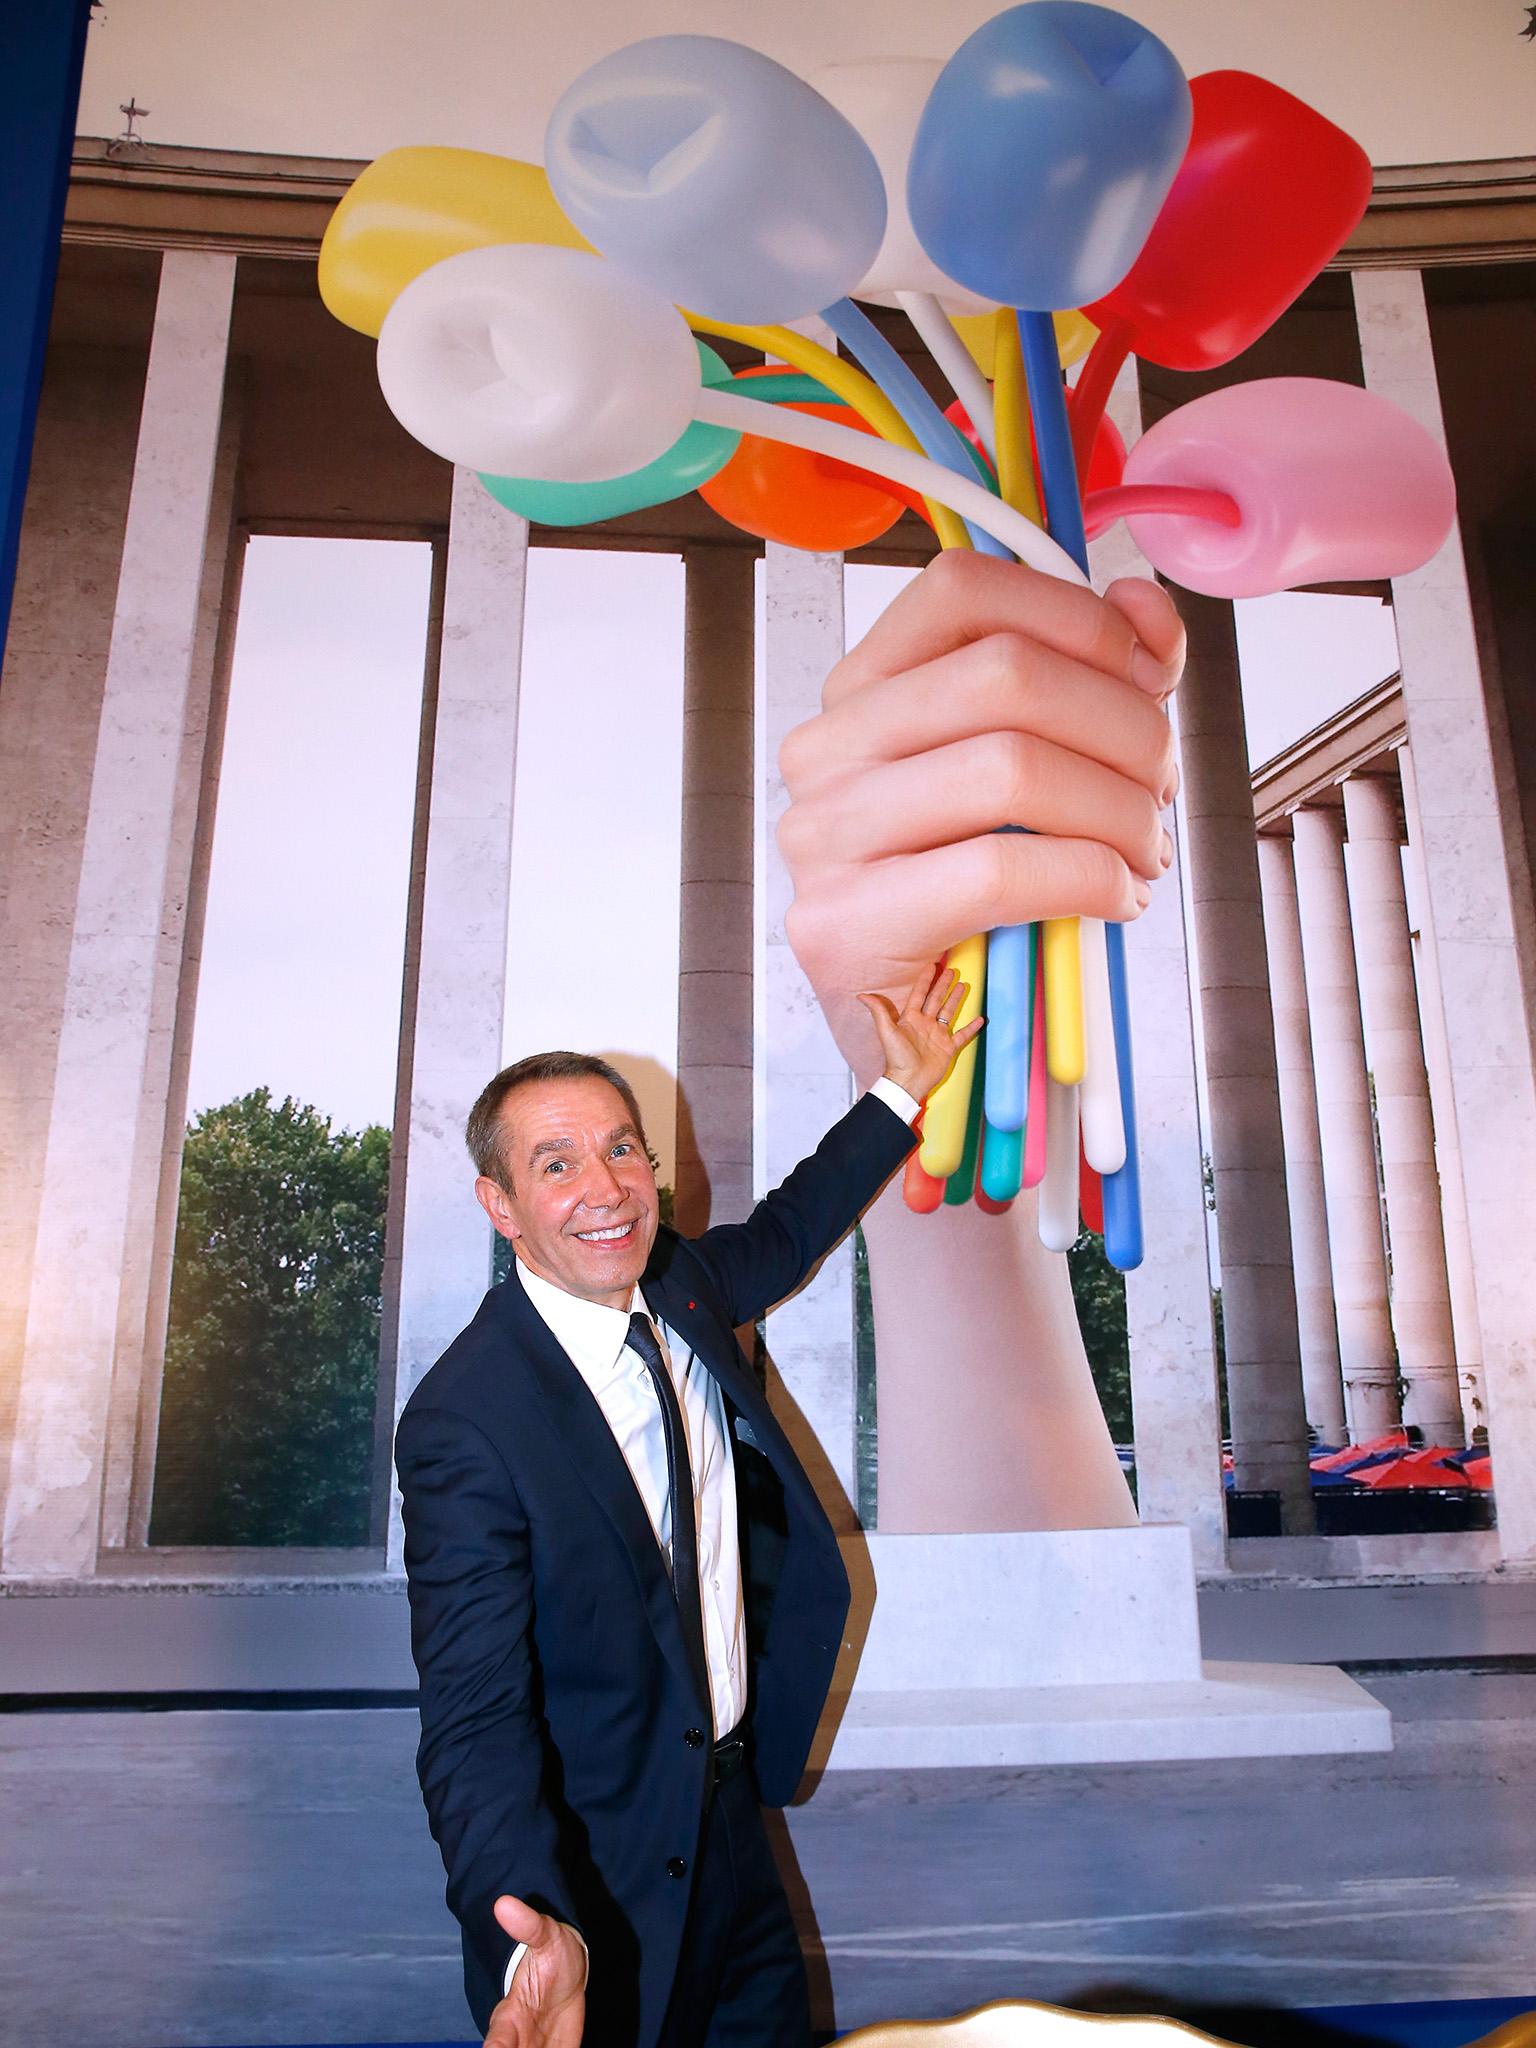 Zwirmer’s 25th-anniversary exhibition will feature artists including Jeff Koons